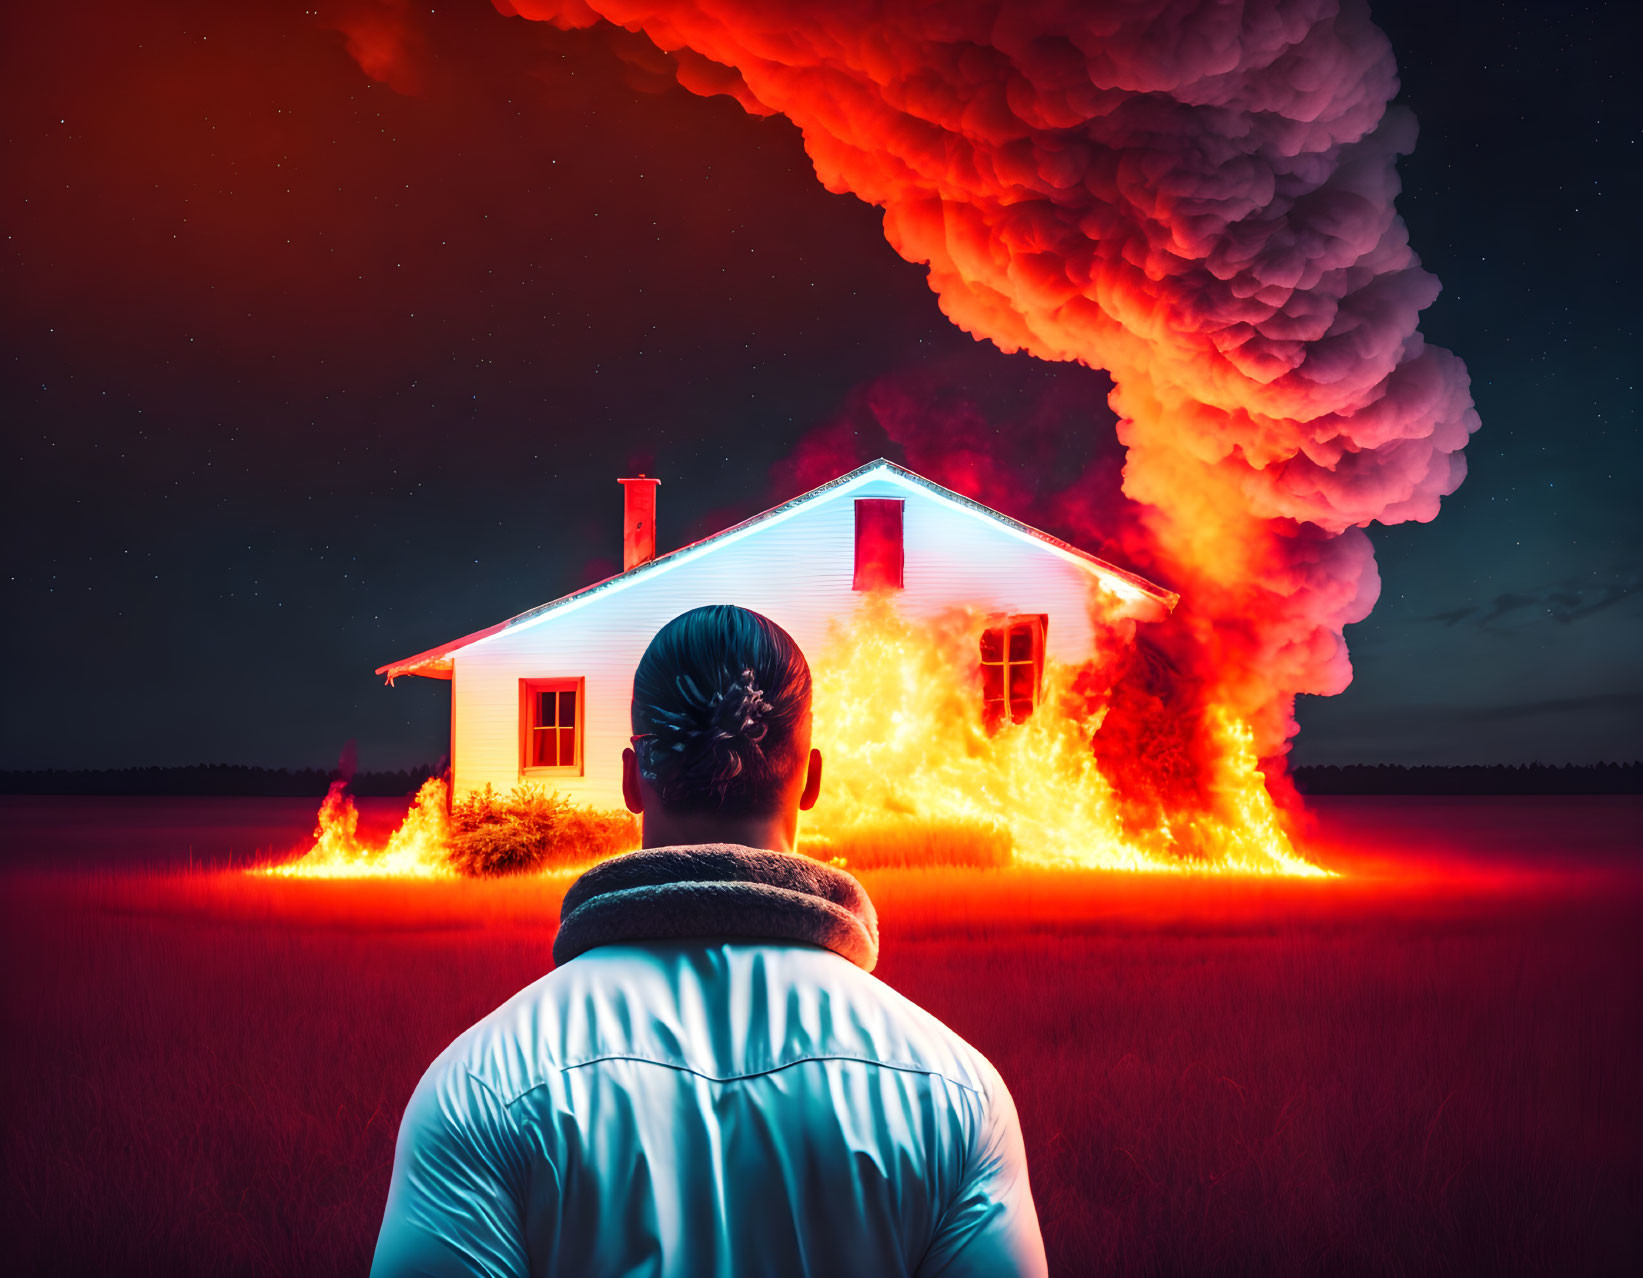 Person watching intense flames engulfing a house at night